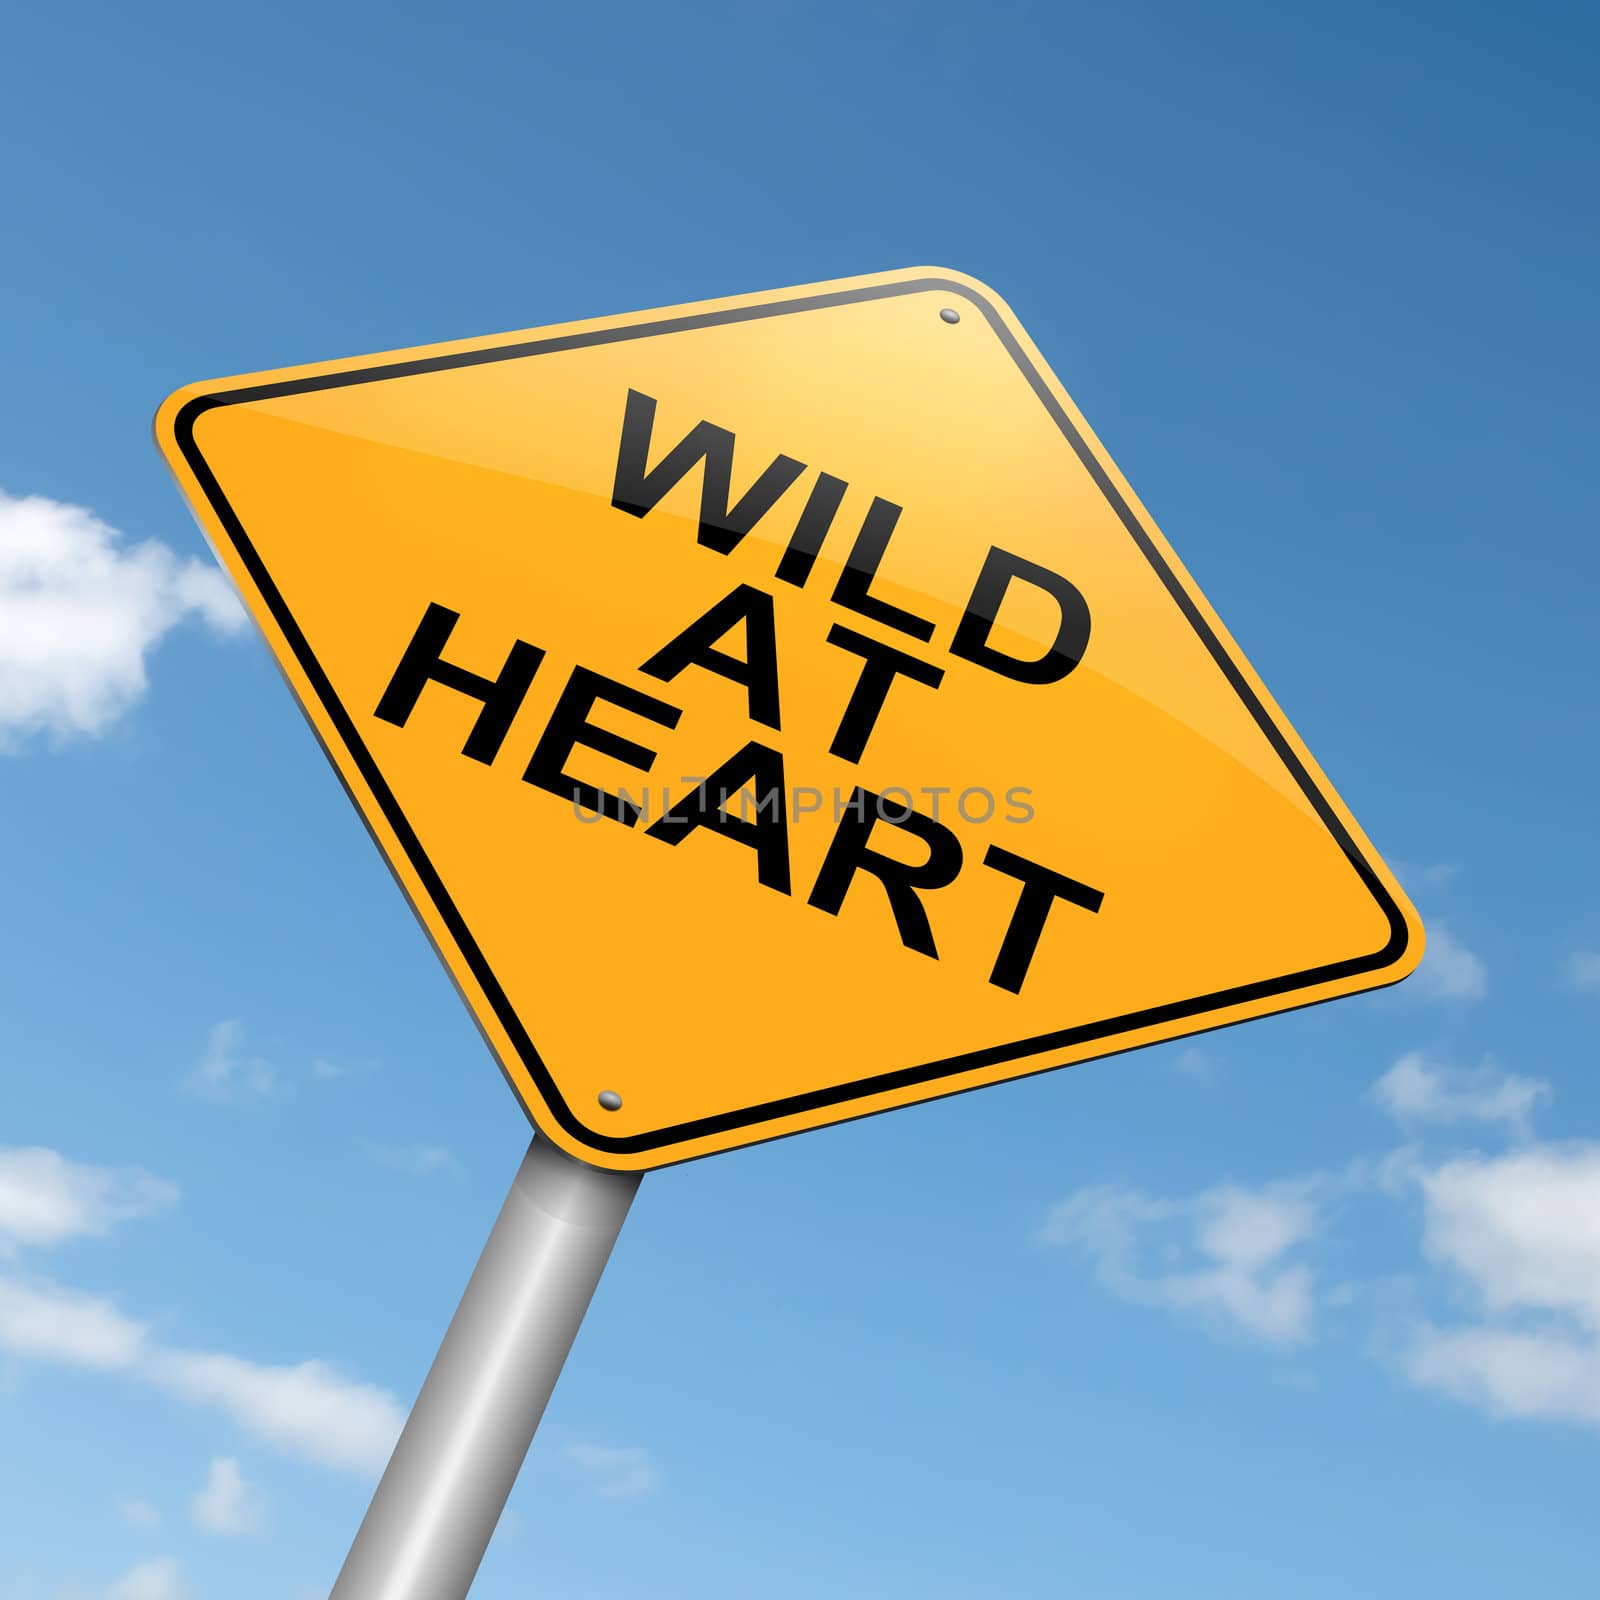 Illustration depicting a roadsign with a 'wild at heart' concept. Blue sky background.